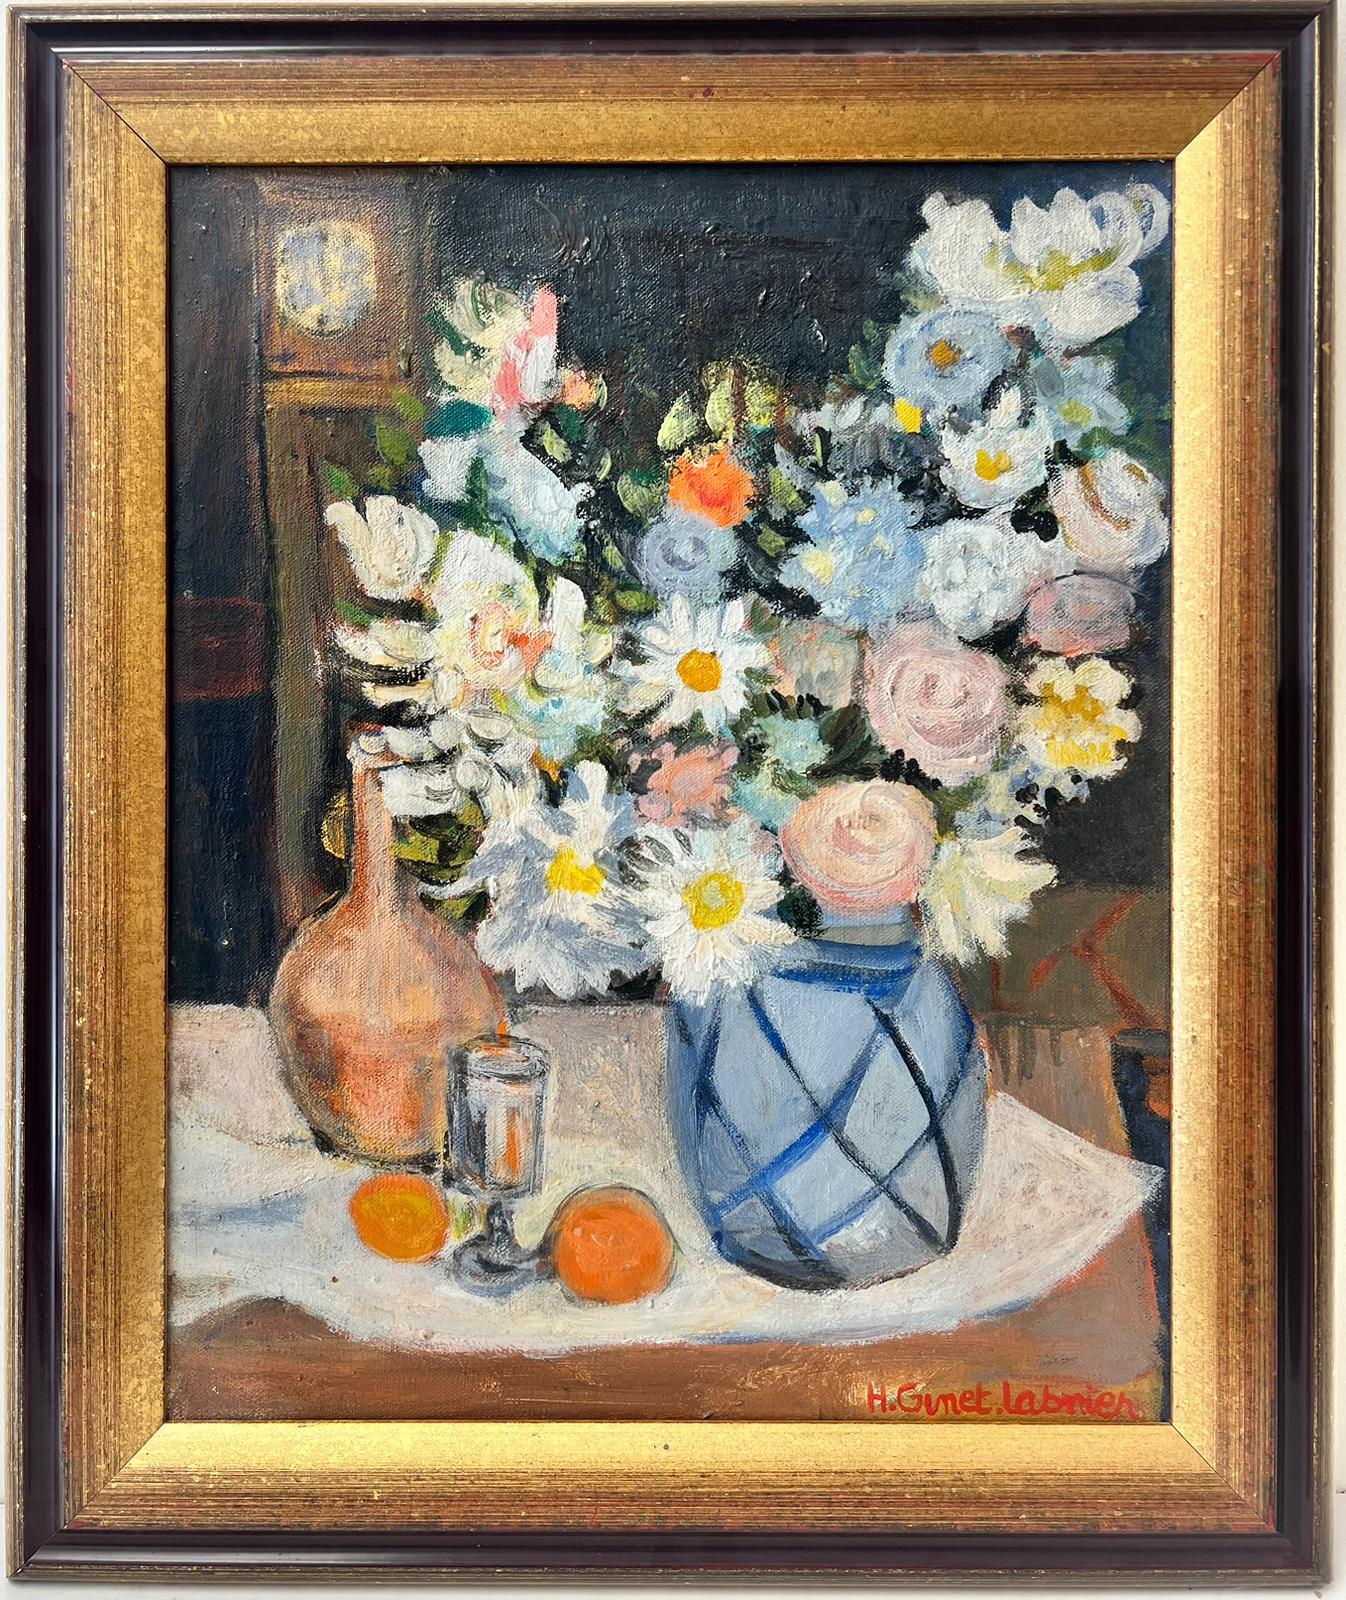 Still Life of Flowers
Huguette Ginet-Lasnier (French 1927-2020)
signed and inscribed verso
framed
oil painting on canvas
framed: 20 x 17 inches
canvas: 16 x 13 inches.
All the paintings we have for sale by this artist have come from the artists